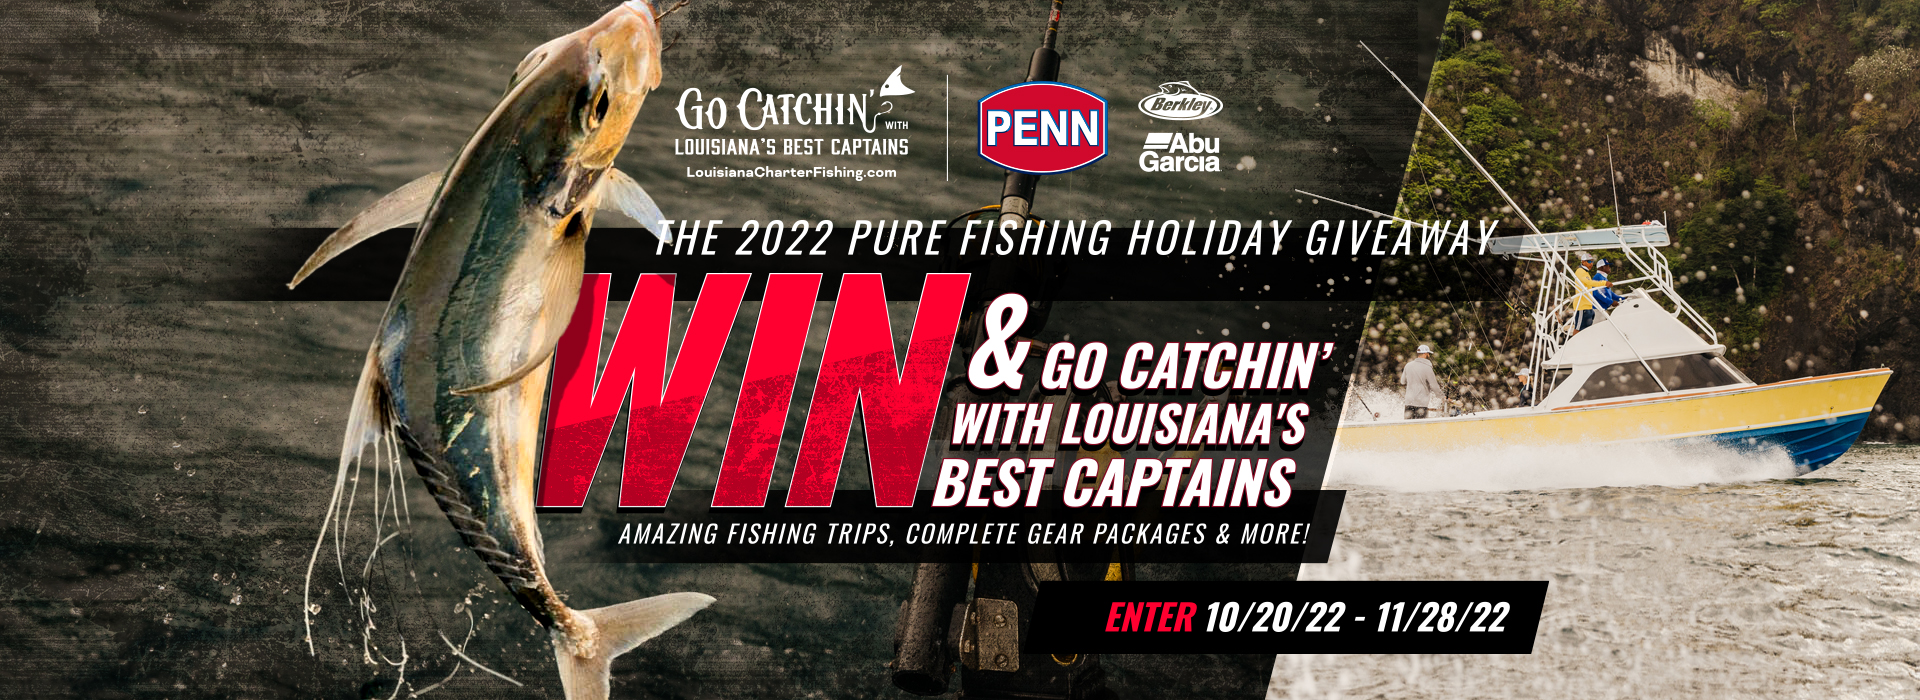 Pure Fishing 2022 Holiday Giveaway: Win and go catchin' with Louisiana's best captains